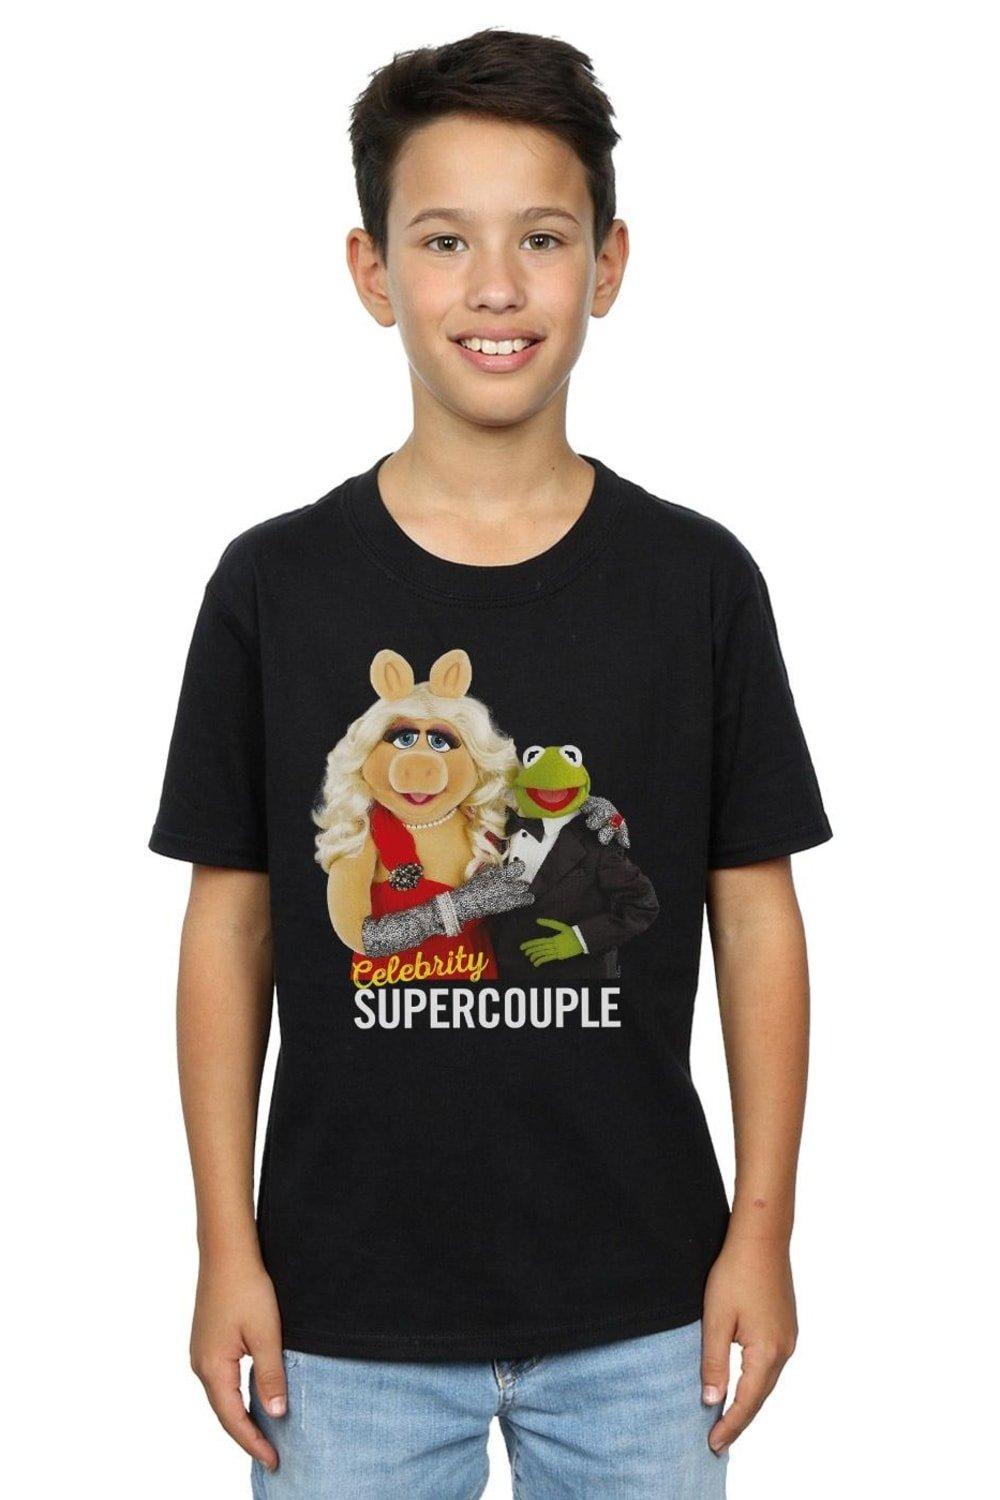 The Muppets Celebrity Supercouple T-Shirt